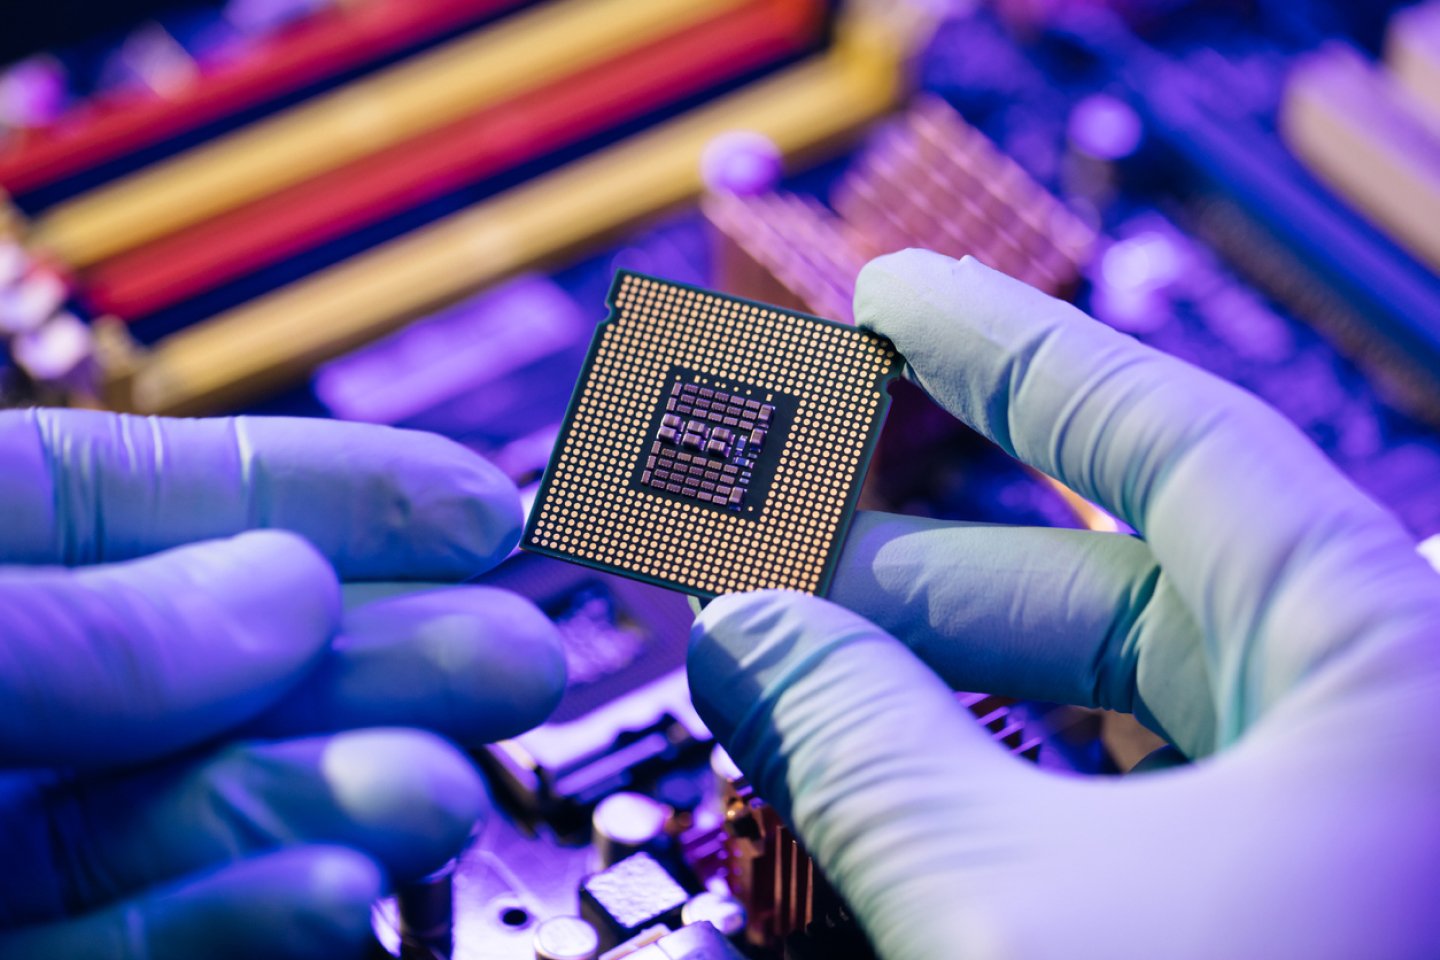 Computer chip being placed since technology is so prominent